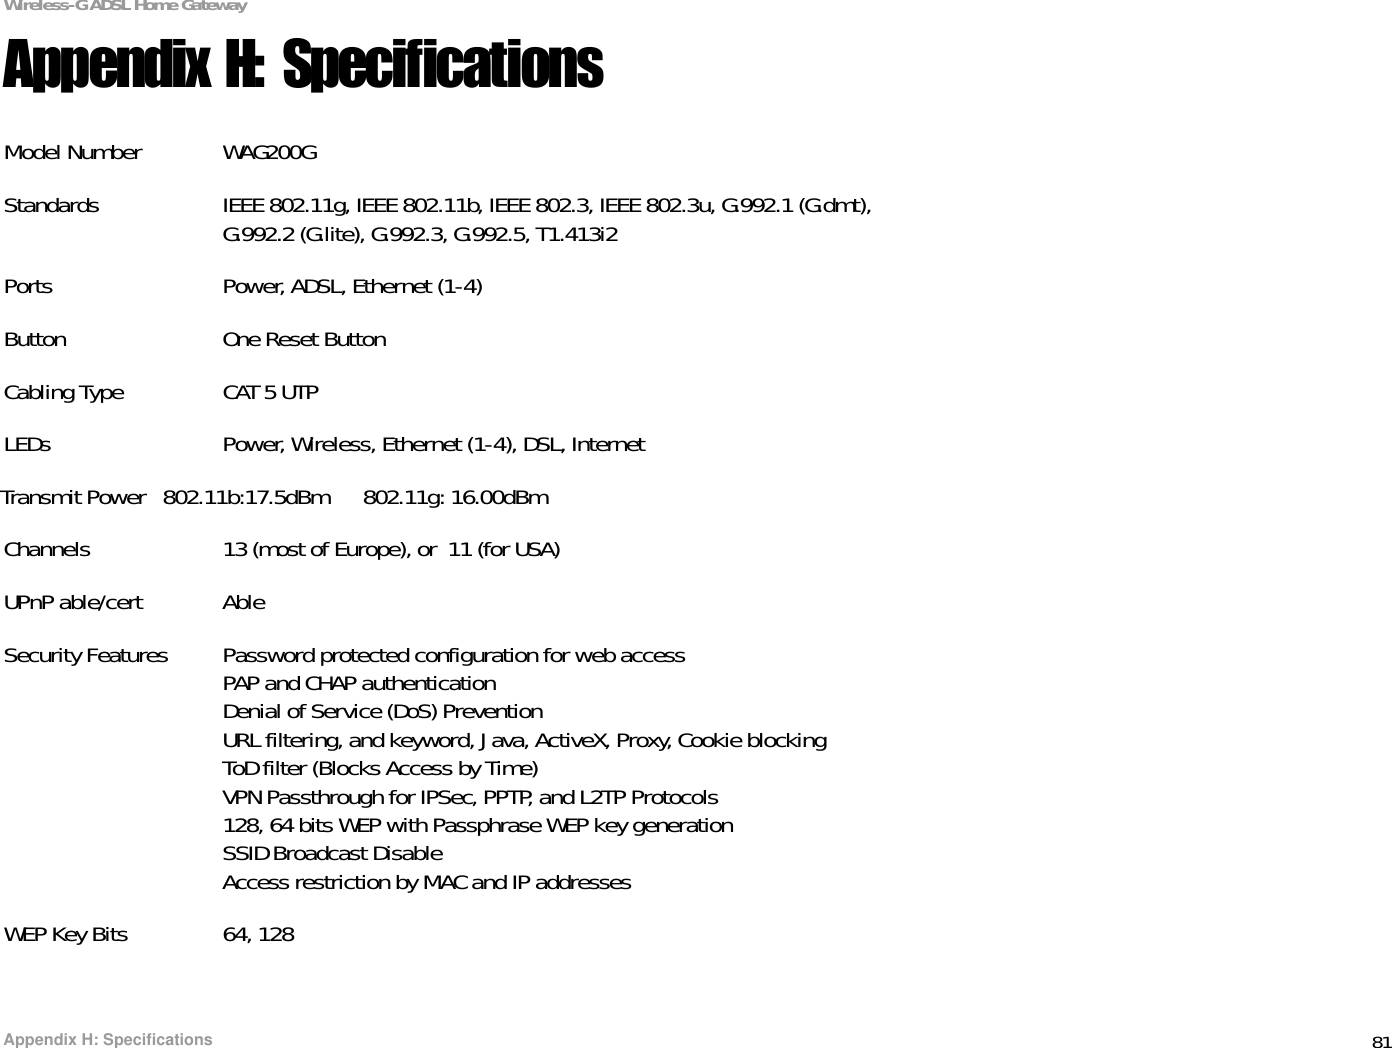 81Appendix H: SpecificationsWireless-G ADSL Home GatewayAppendix H: SpecificationsModel Number WAG200GStandards IEEE 802.11g, IEEE 802.11b, IEEE 802.3, IEEE 802.3u, G.992.1 (G.dmt),G.992.2 (G.lite), G.992.3, G.992.5, T1.413i2Ports Power, ADSL, Ethernet (1-4)Button One Reset ButtonCabling Type CAT 5 UTPLEDs Power, Wireless, Ethernet (1-4), DSL, InternetTransmit Power   802.11b:17.5dBm      802.11g: 16.00dBmChannels 13 (most of Europe), or  11 (for USA)UPnP able/cert AbleSecurity Features Password protected configuration for web accessPAP and CHAP authenticationDenial of Service (DoS) PreventionURL filtering, and keyword, Java, ActiveX, Proxy, Cookie blockingToD filter (Blocks Access by Time)VPN Passthrough for IPSec, PPTP, and L2TP Protocols128, 64 bits WEP with Passphrase WEP key generationSSID Broadcast DisableAccess restriction by MAC and IP addressesWEP Key Bits 64, 128